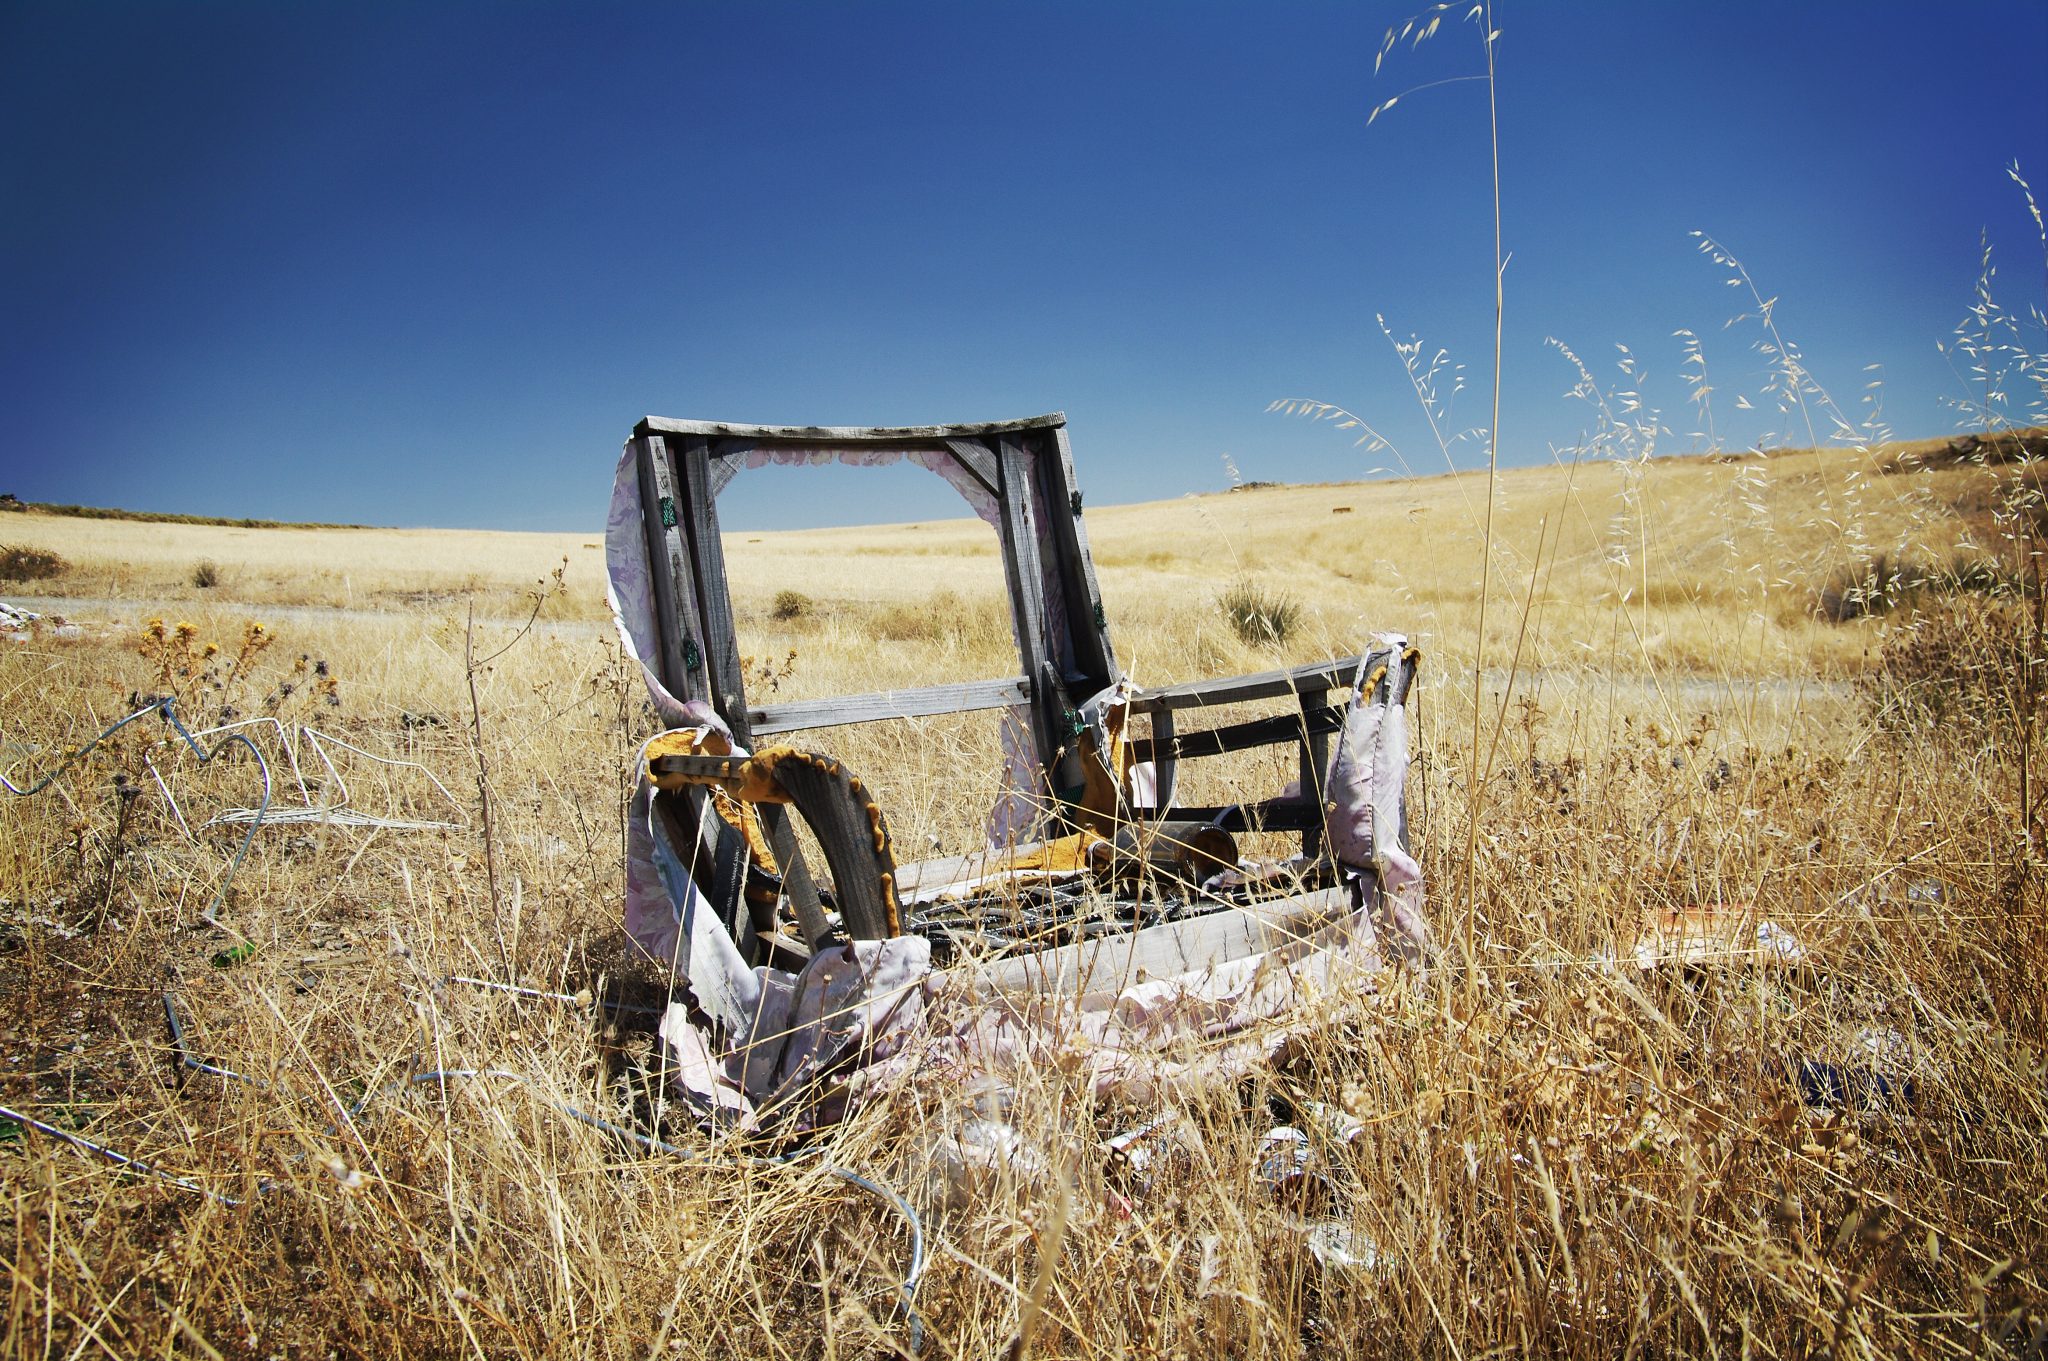 A wreck of an old armchair discarded in the Spanish countryside